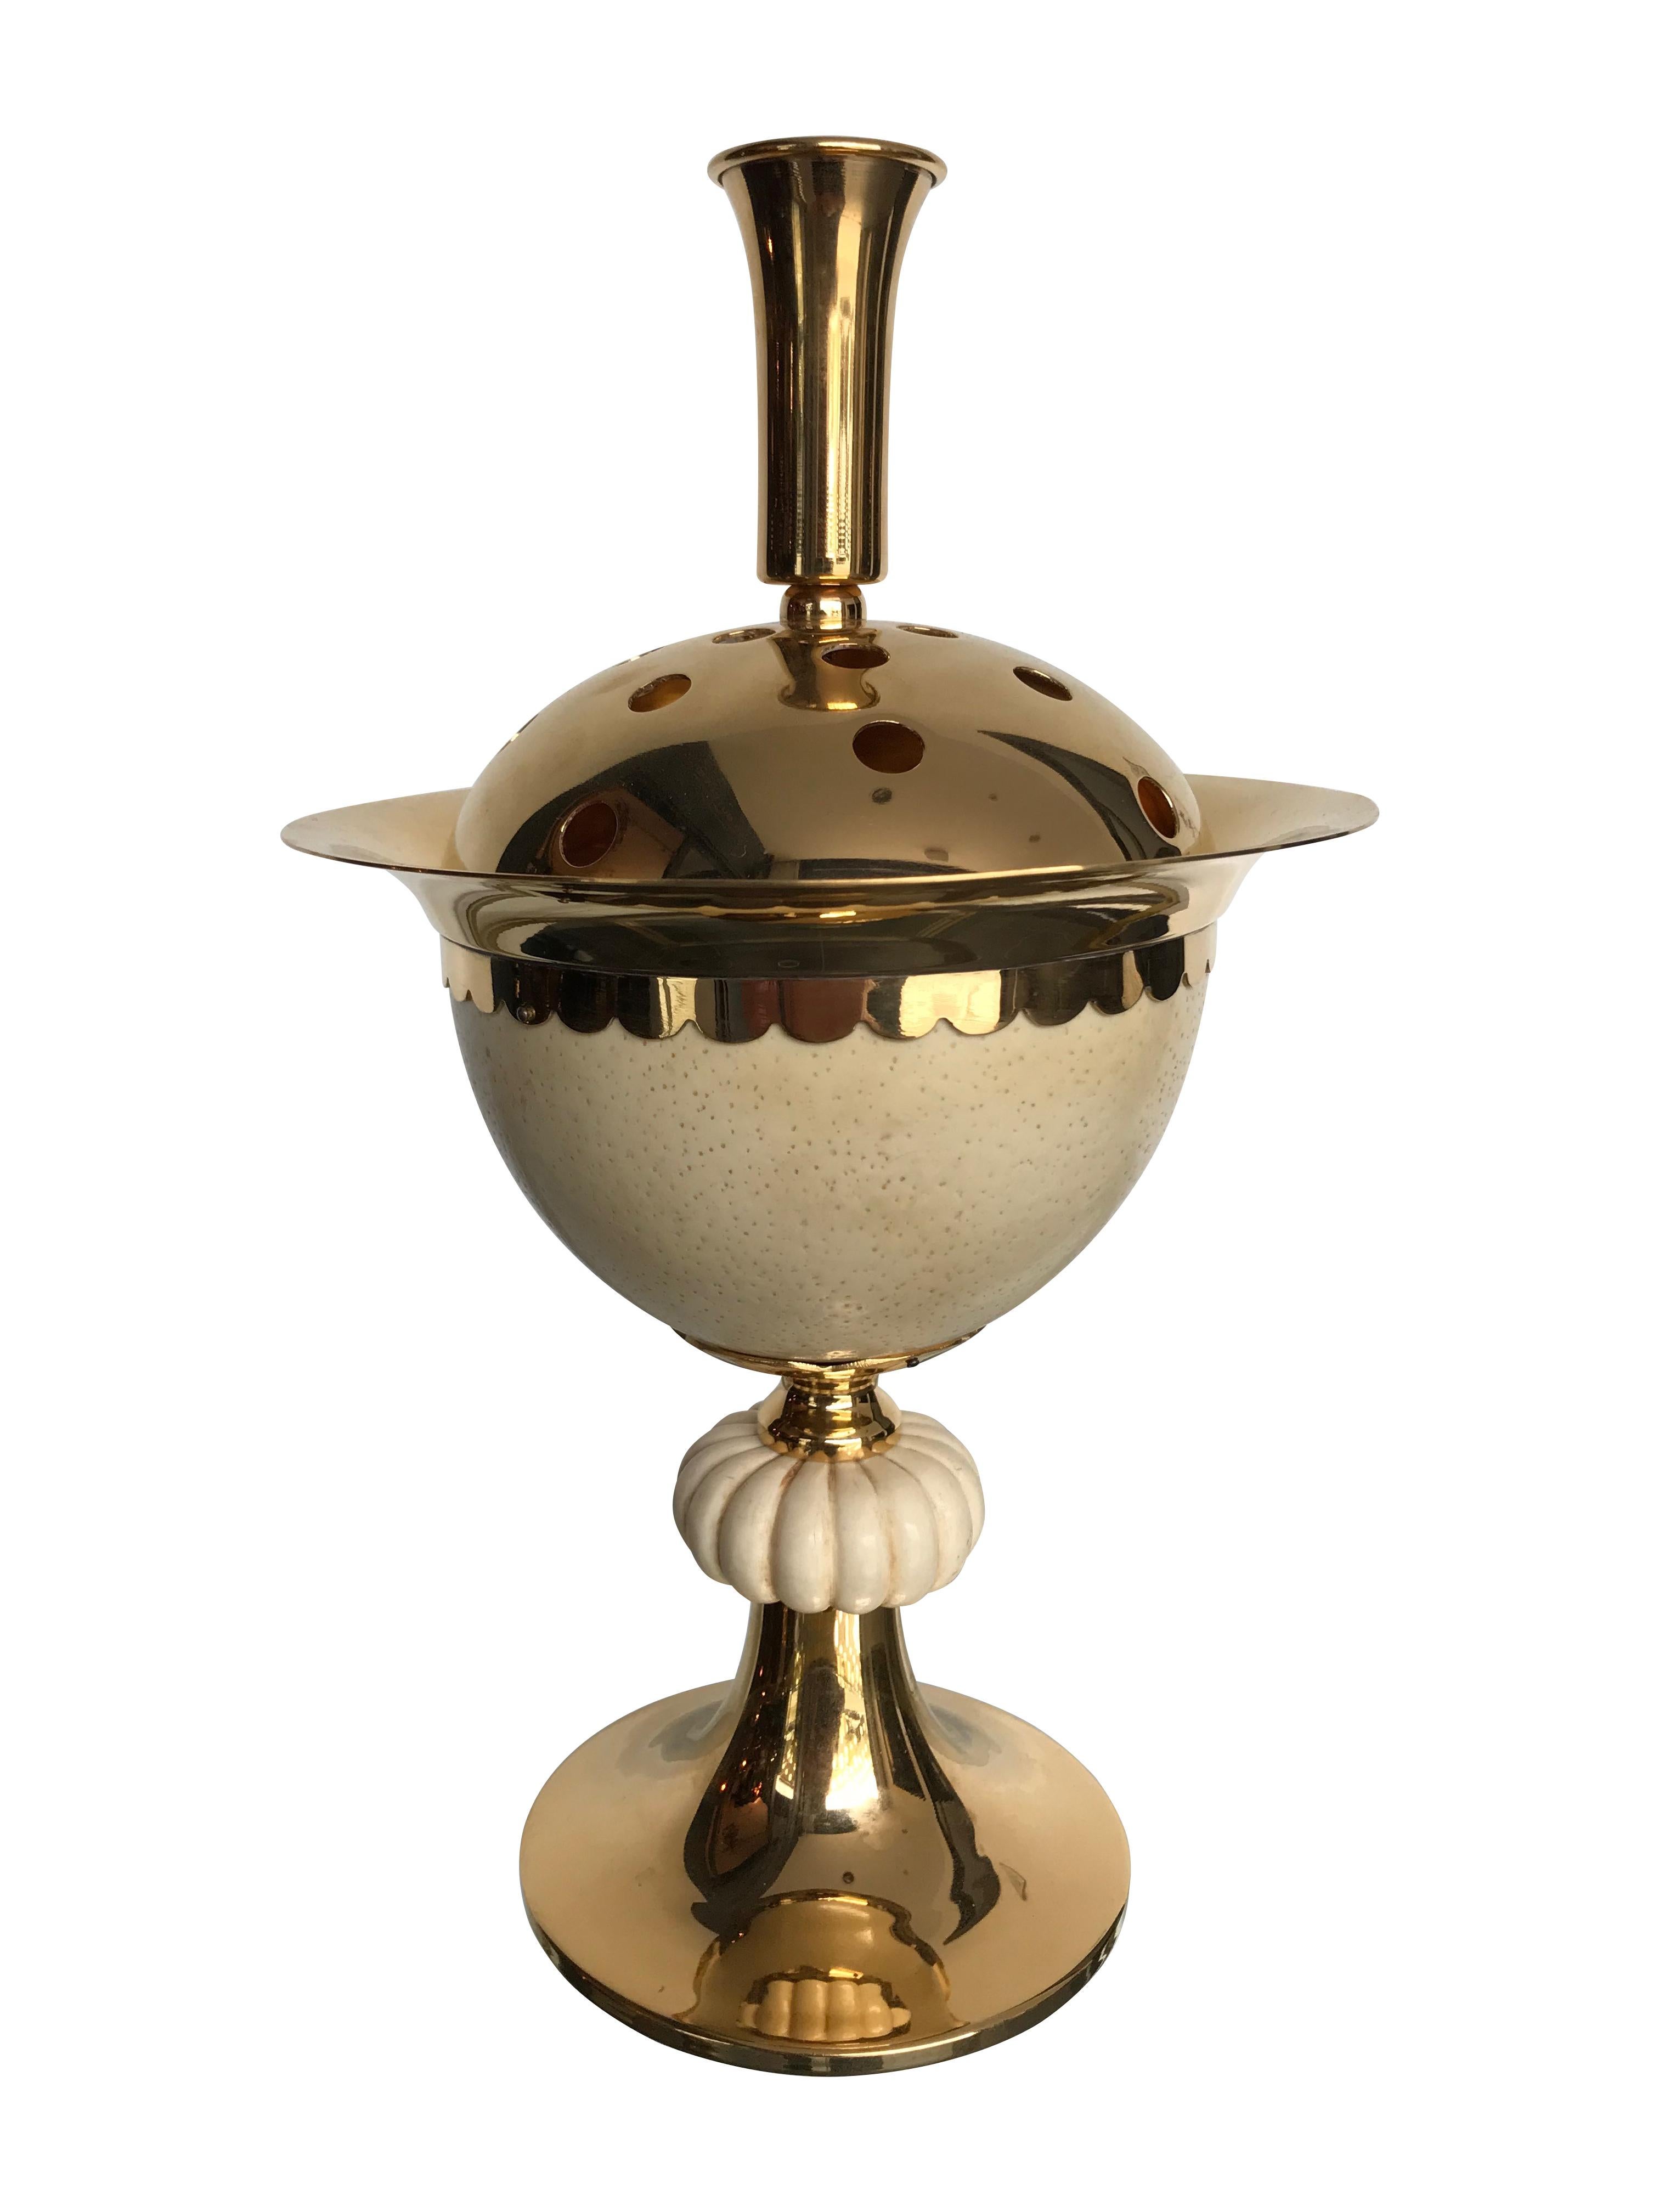 Late 20th Century 1970s Potpourri Holder in Gilt Metal with Real Ostrich Egg by Christian Dior